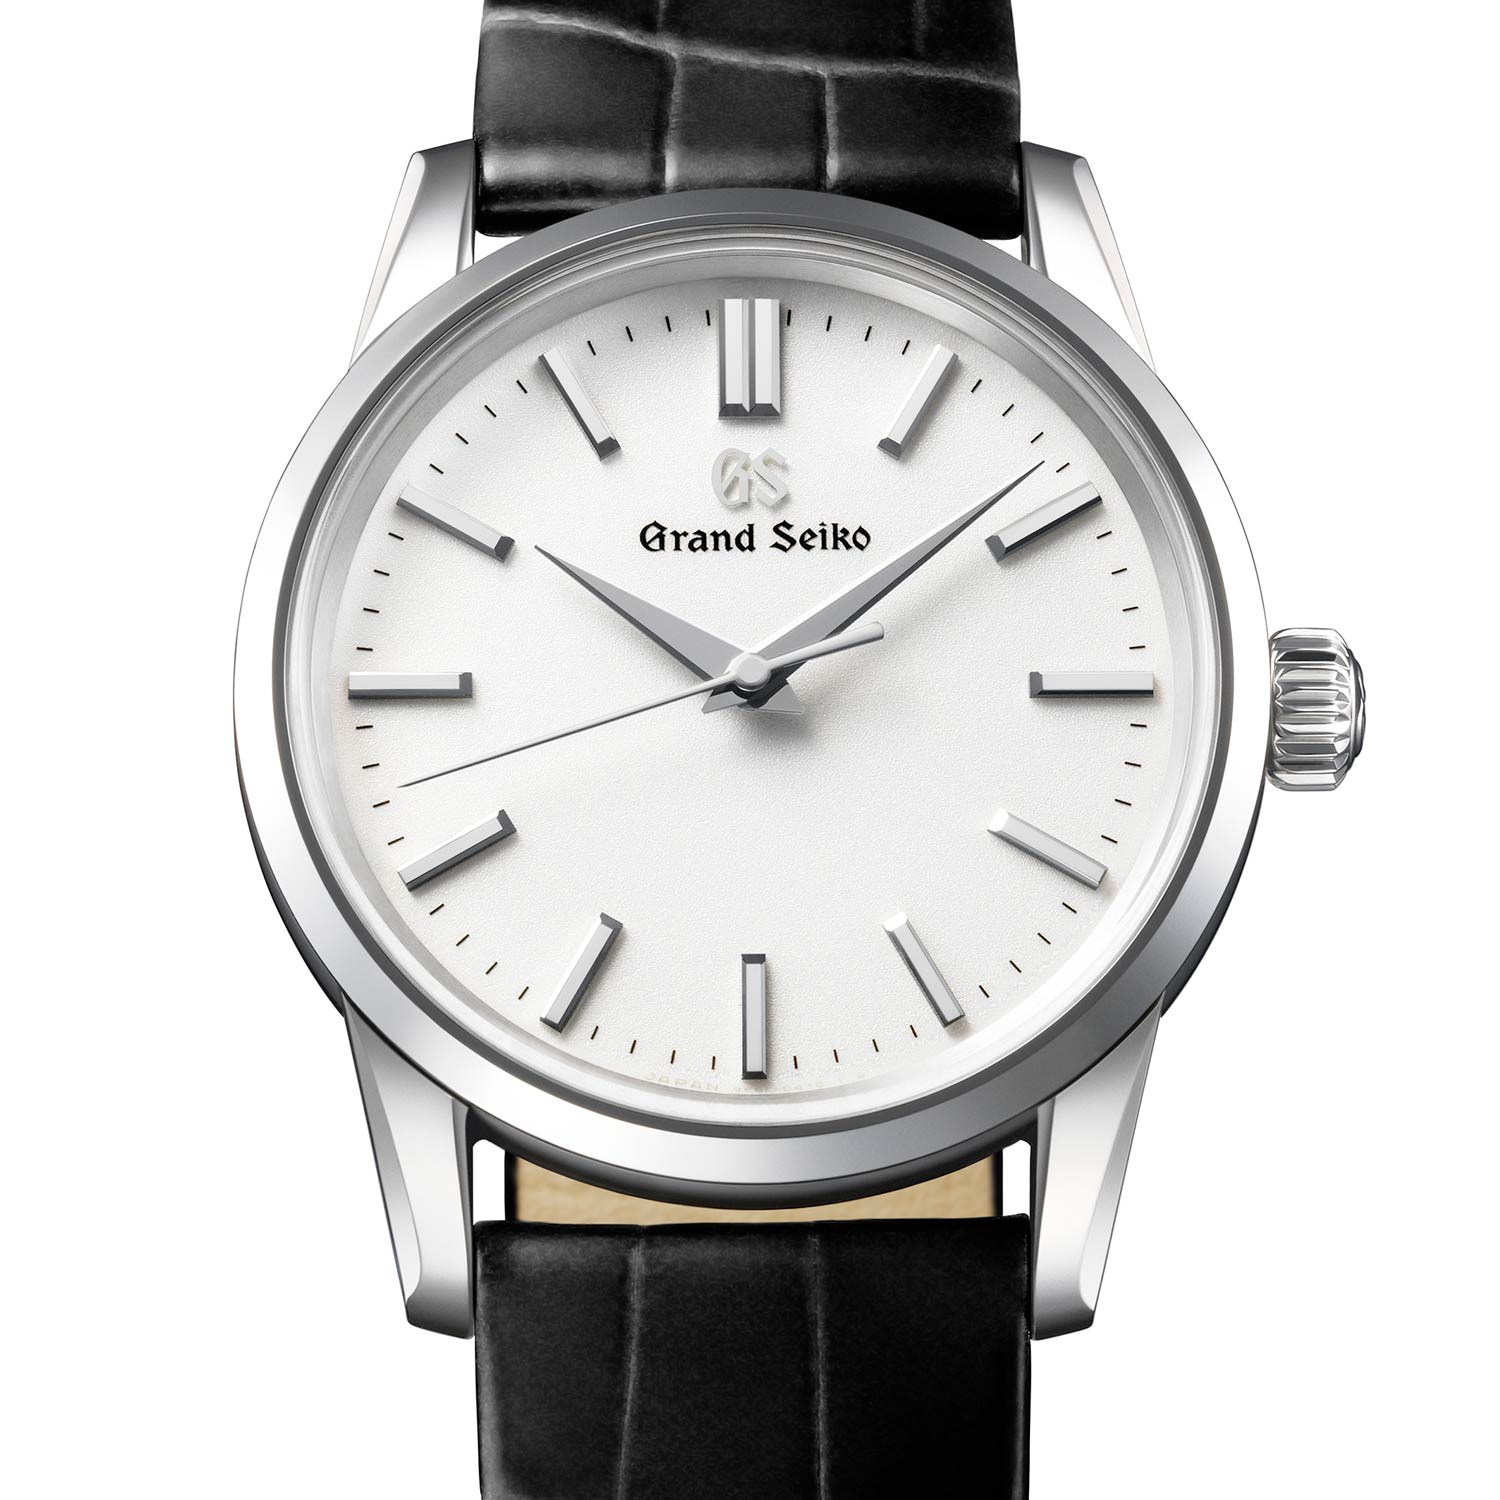 The SBGX347 has a clean, noble look, with a white dial evoking moonlight